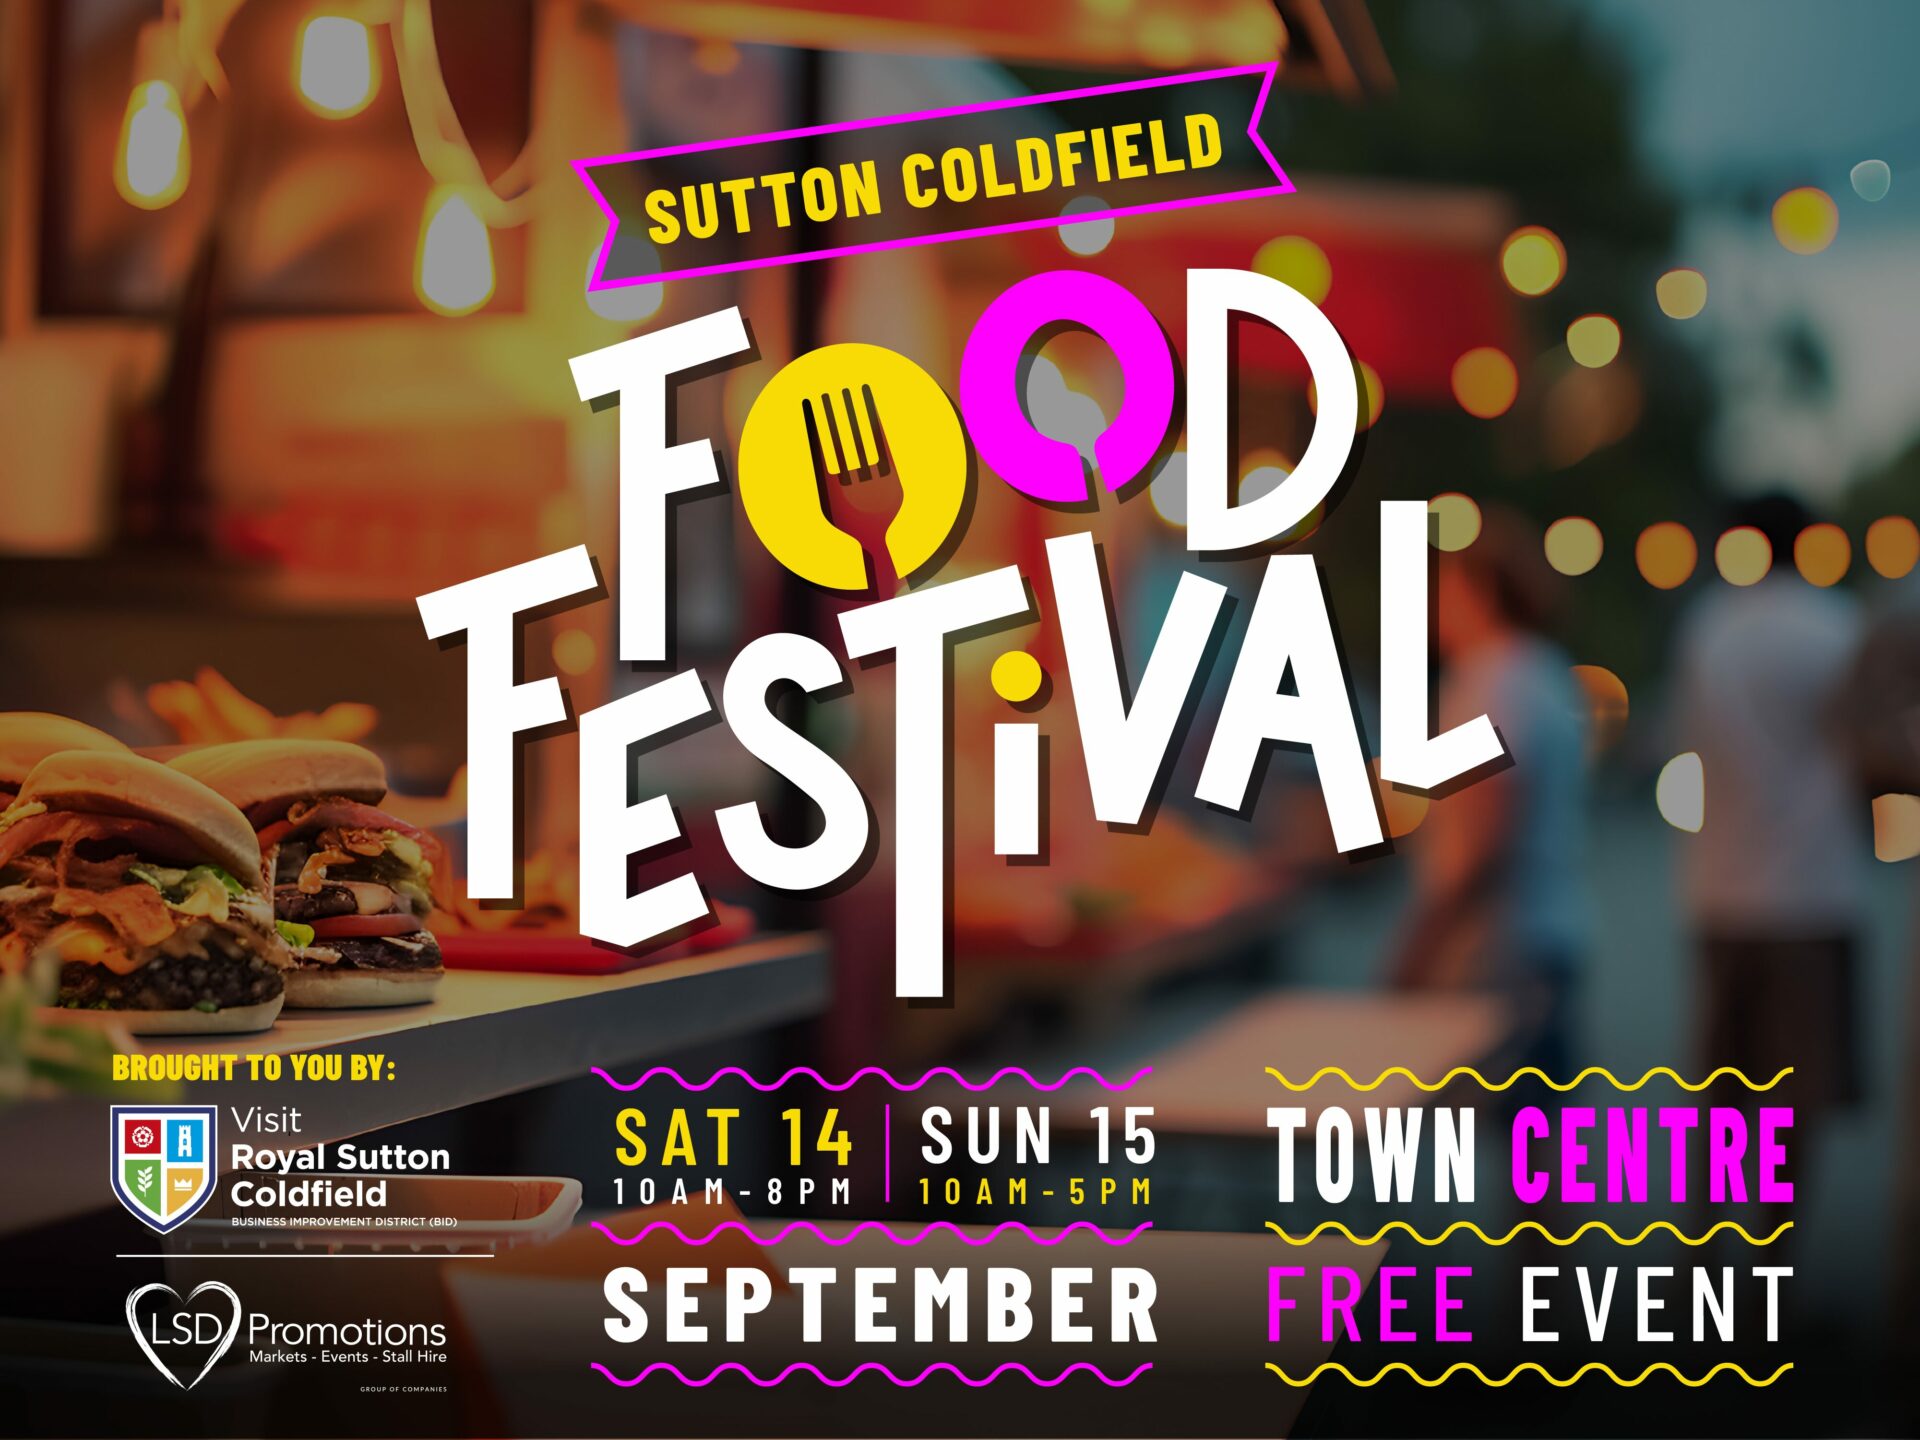 Sutton Coldfield Food Festival | 14th & 15th September | FREE EVENT!